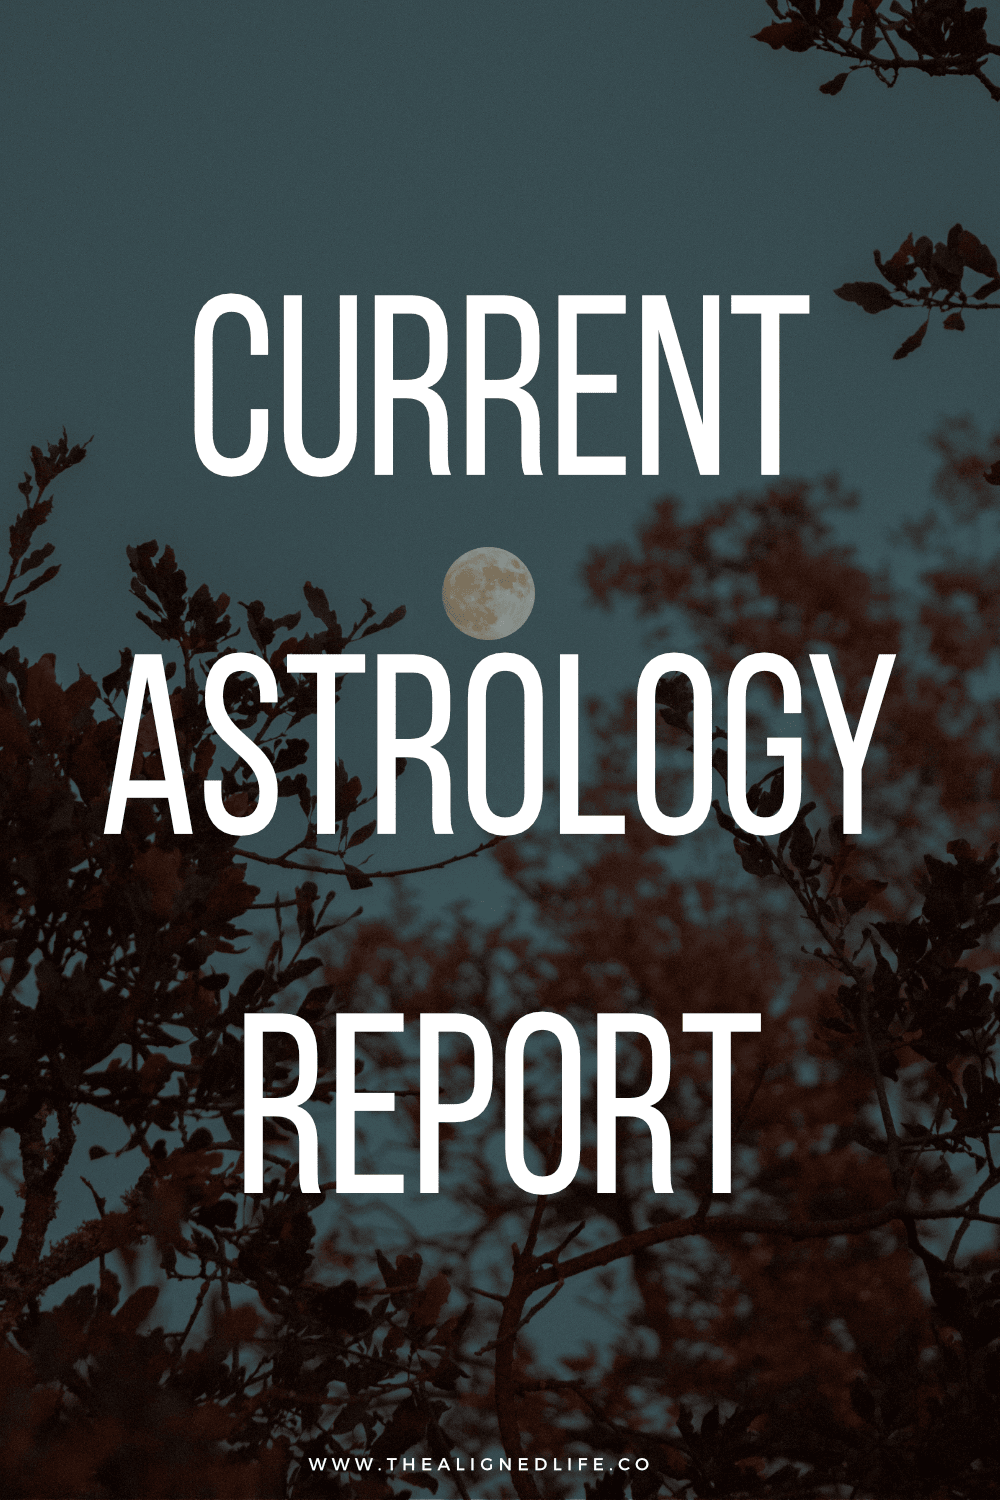 Current Astrology Report | The Aligned Life